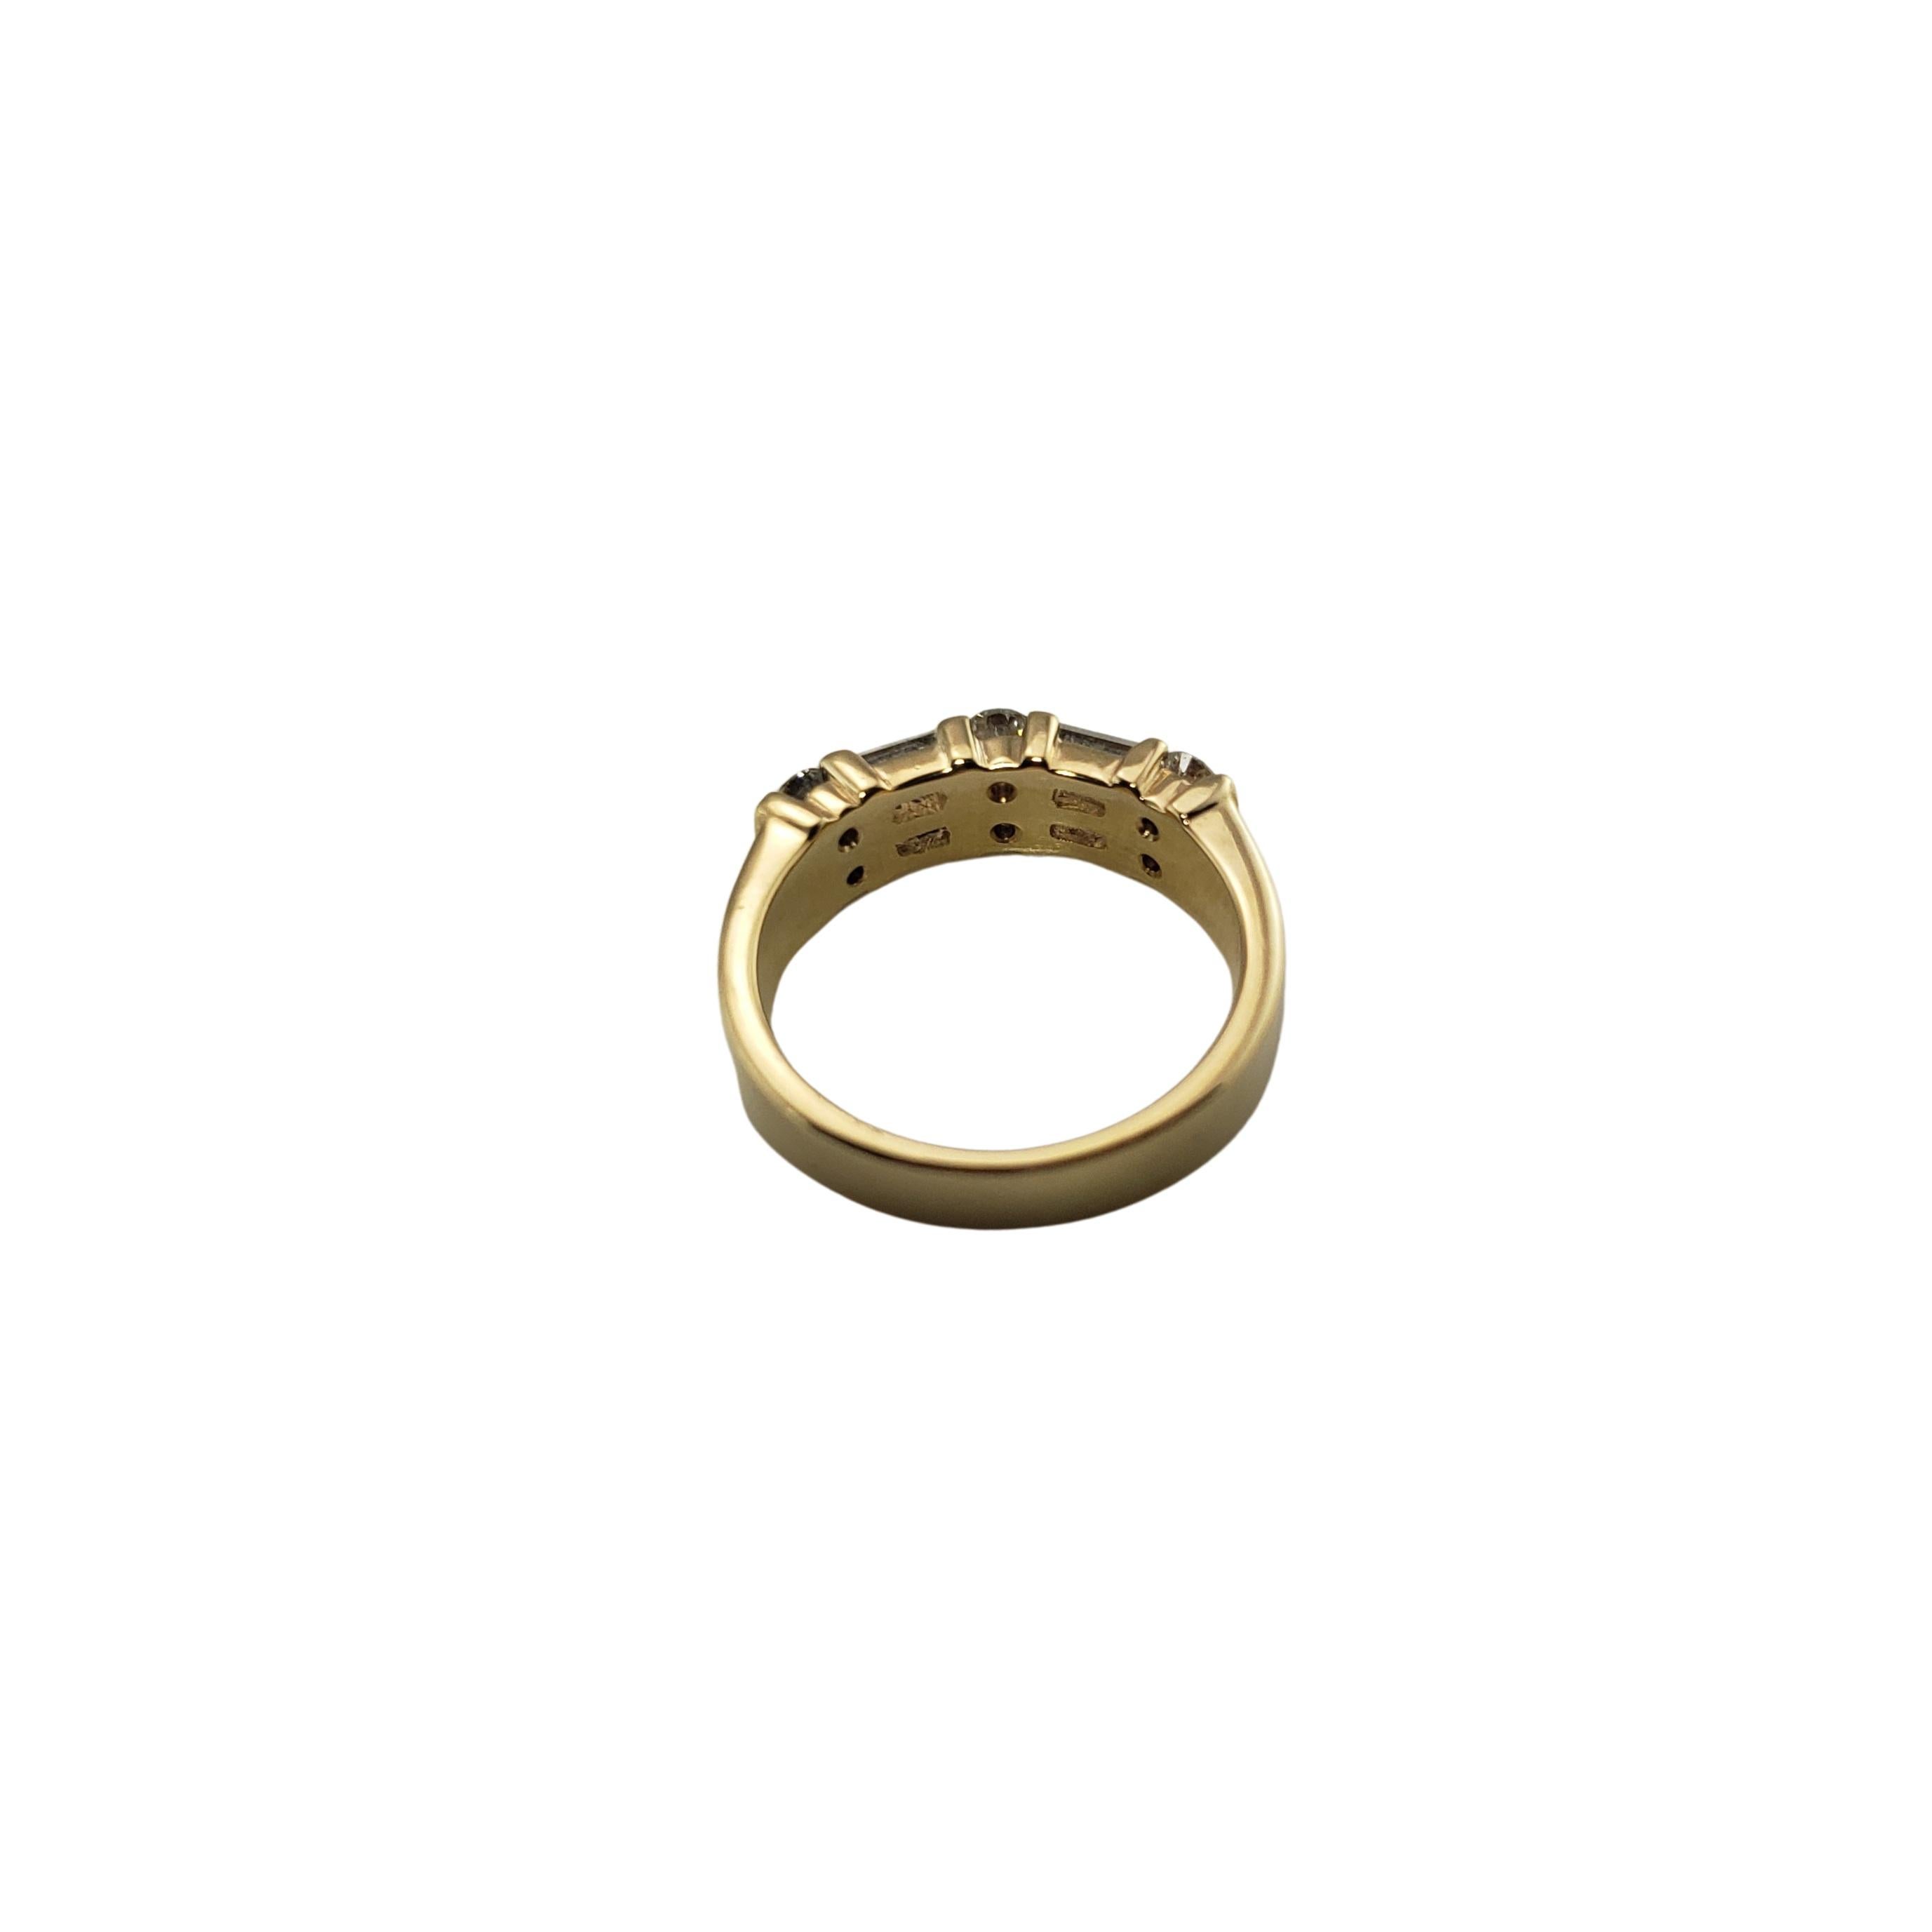 14 Karat Yellow Gold and Diamond Ring Size 4.75 #16648 In Good Condition For Sale In Washington Depot, CT